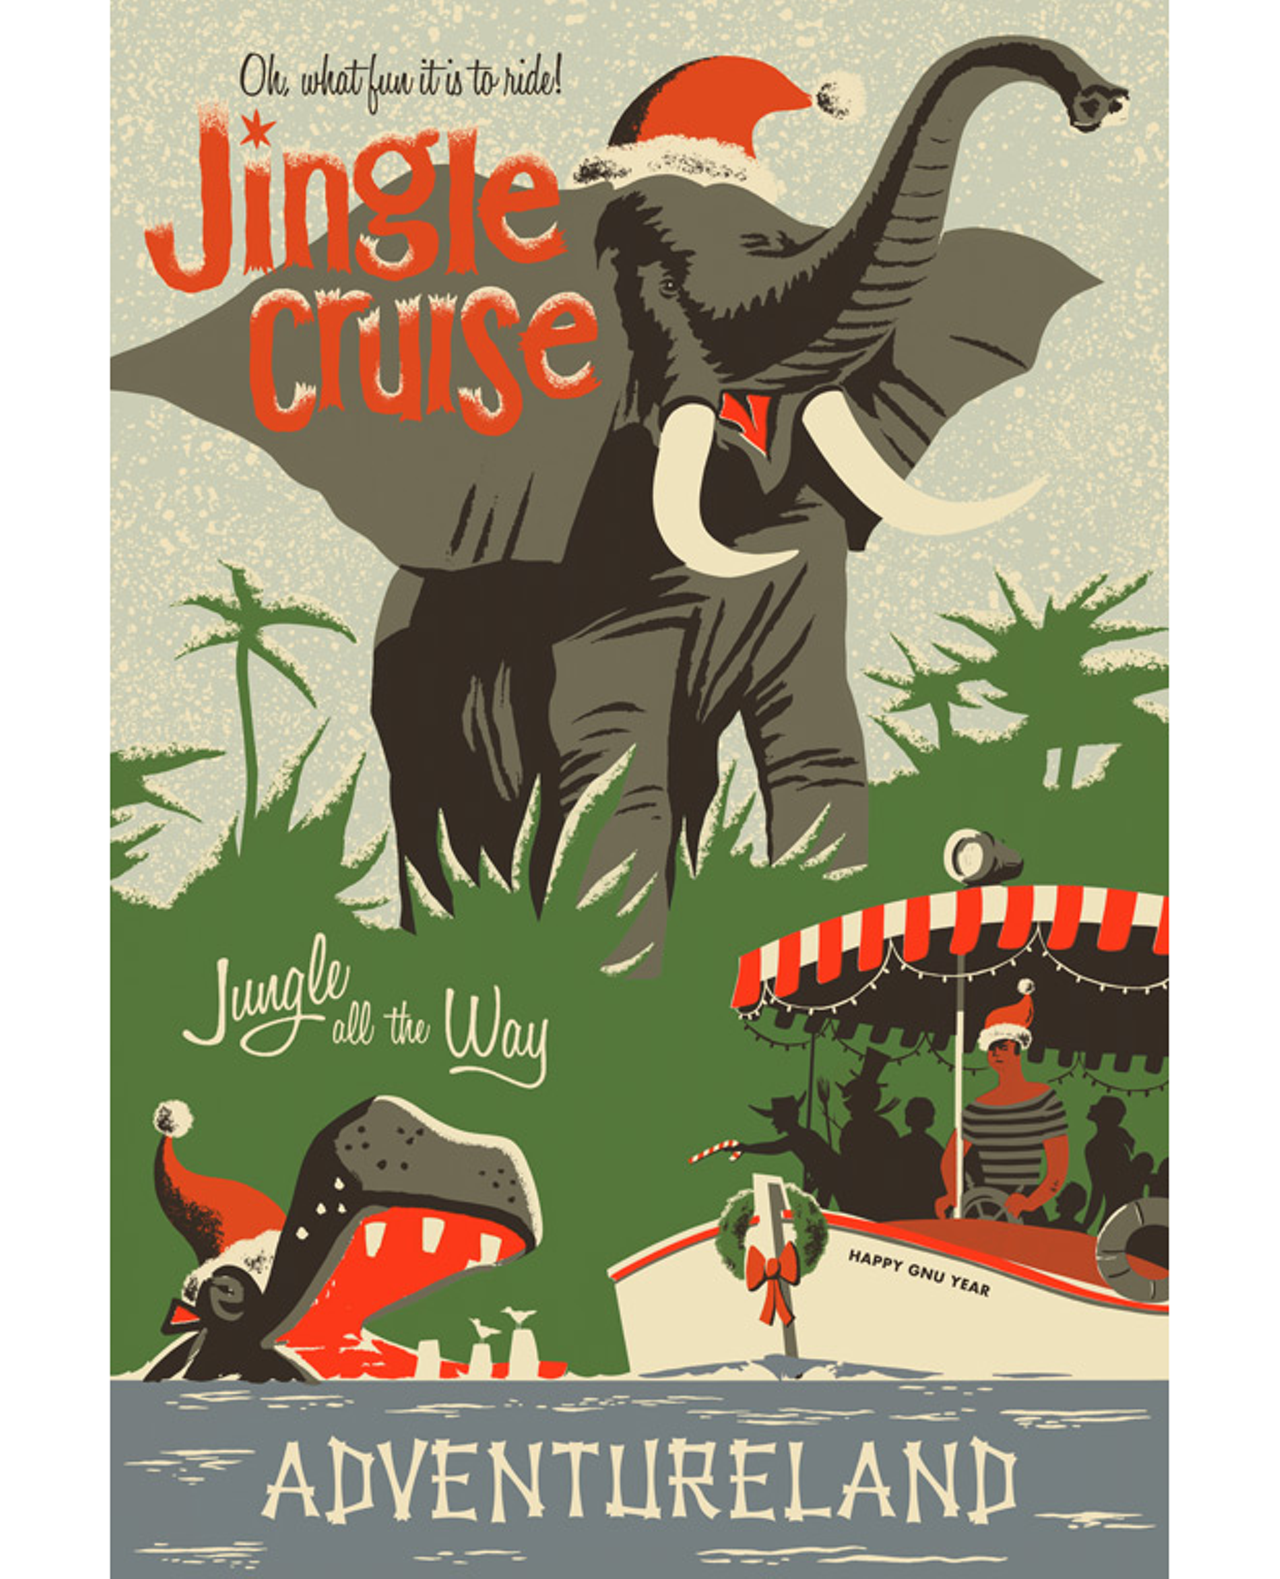 First photos of Disney's new Jingle Cruise